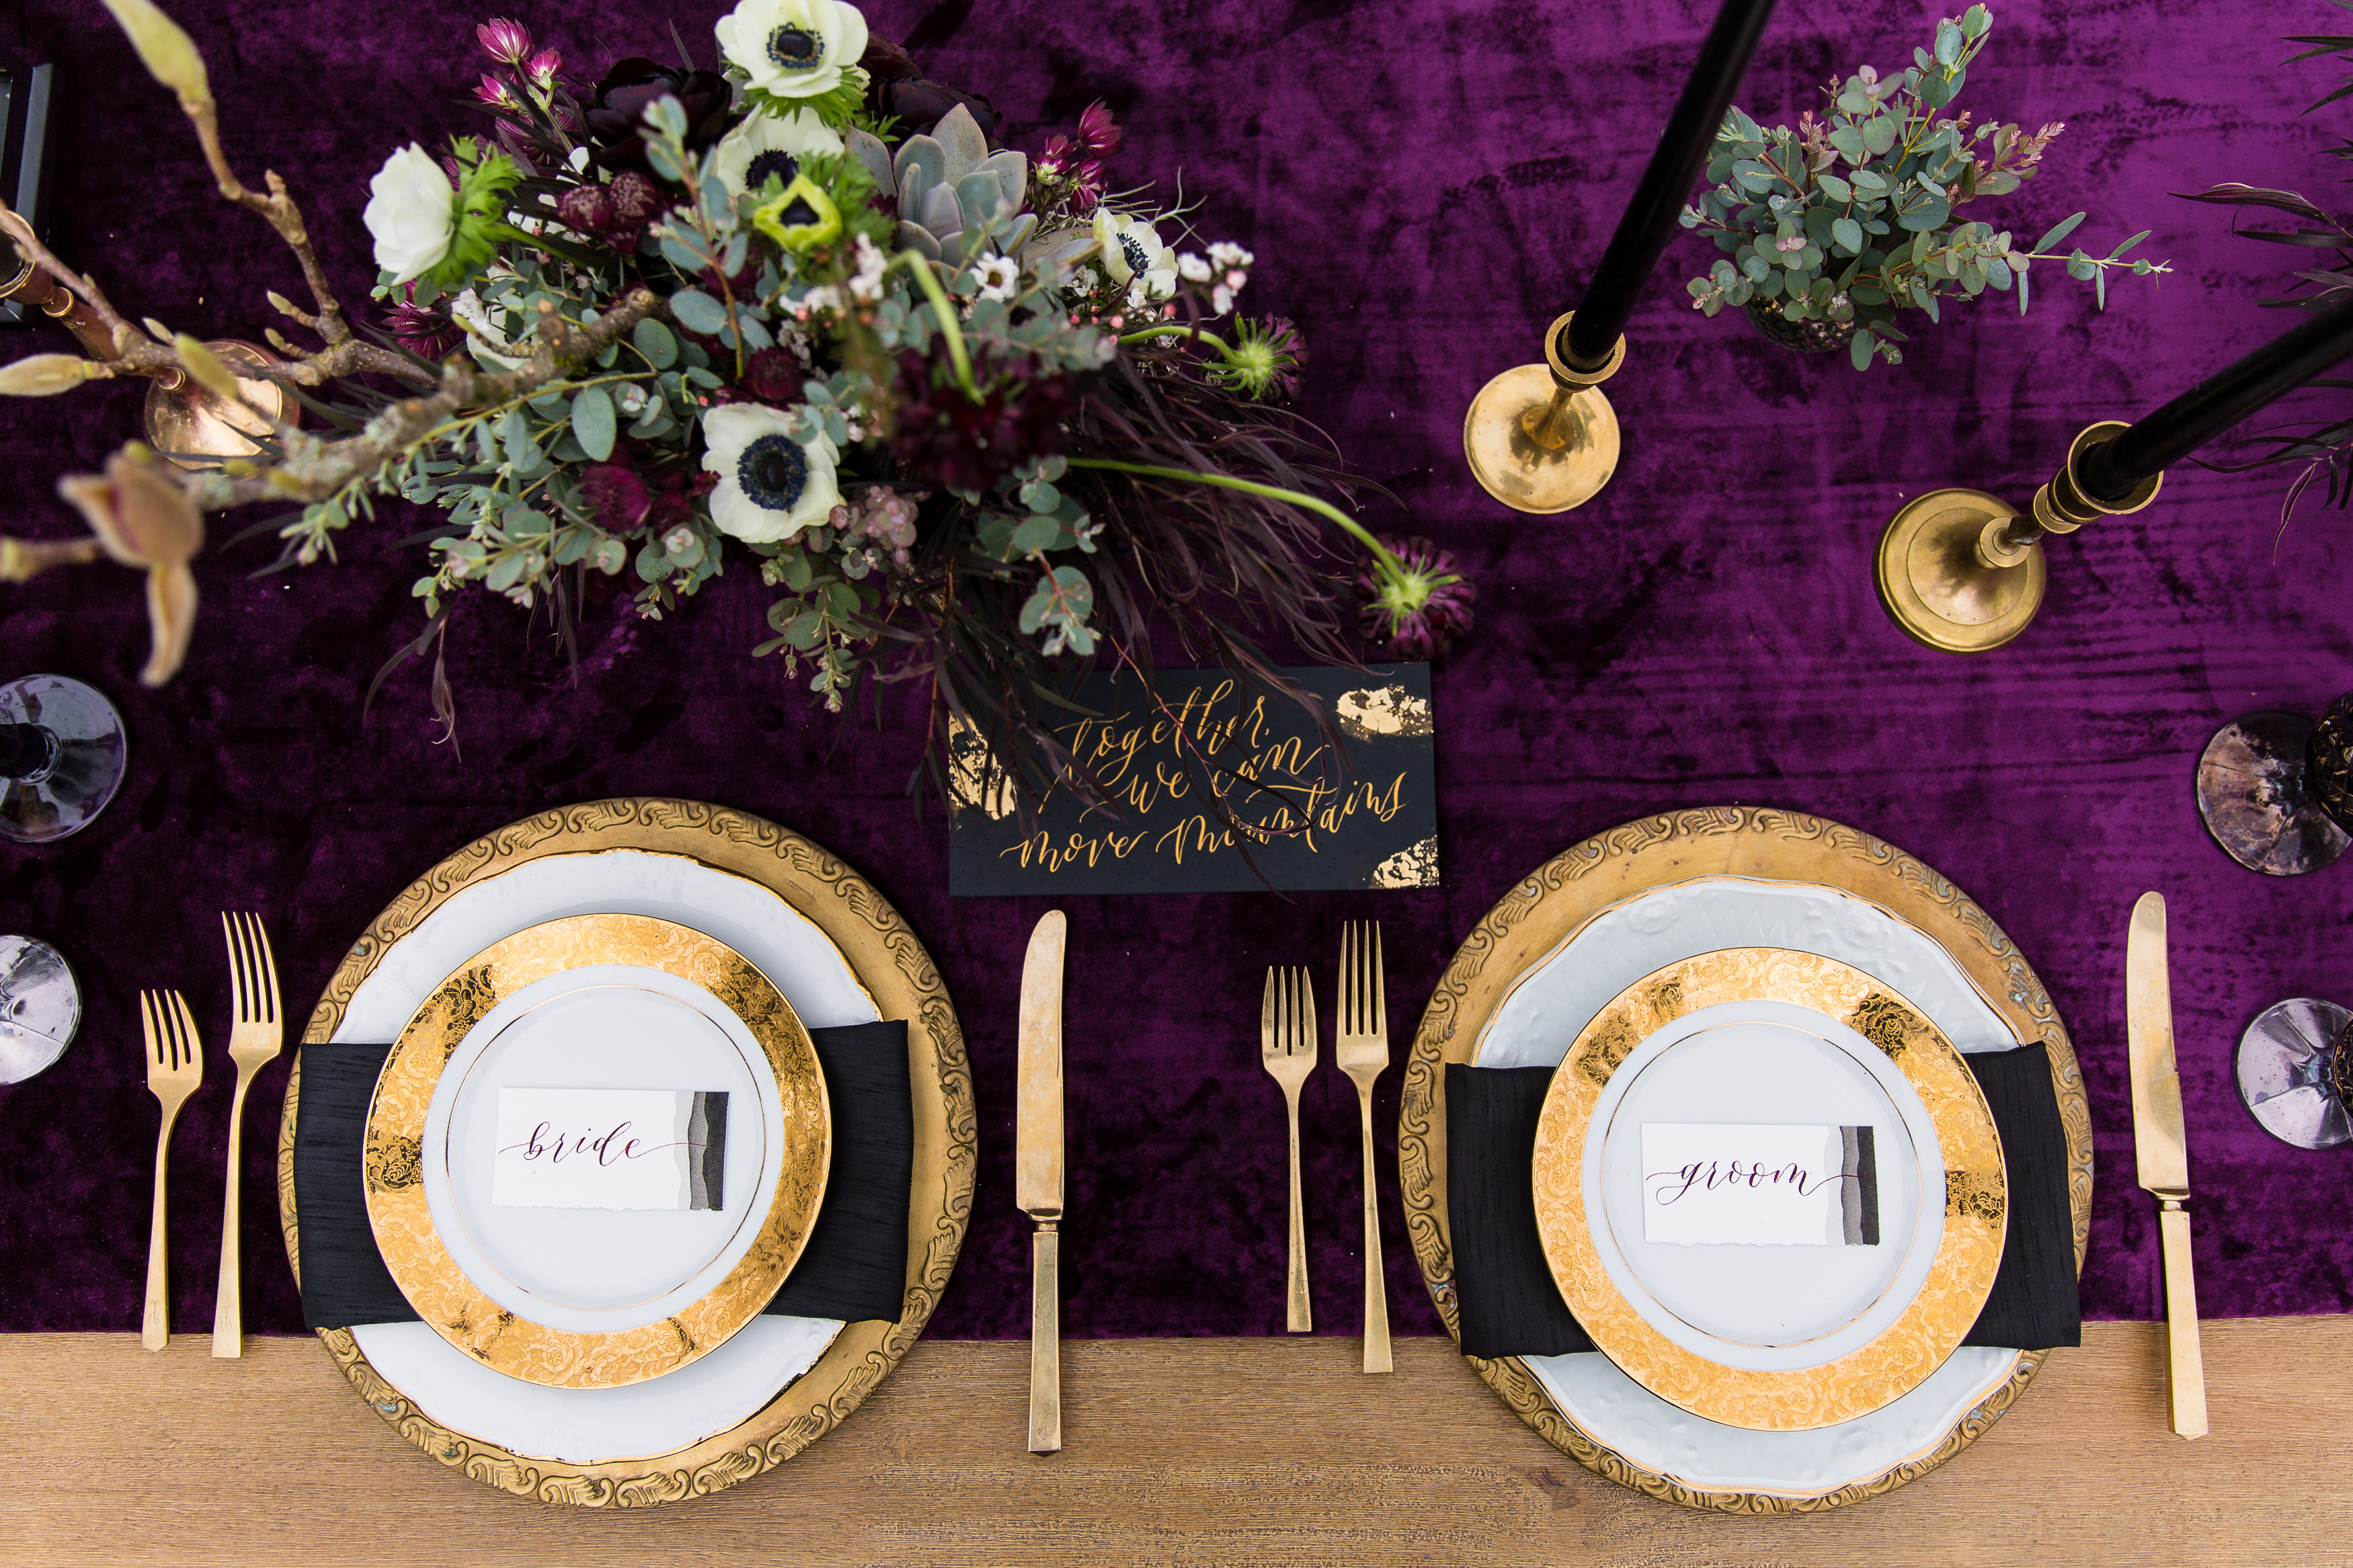 Purple sweetheart table with gold plates and black accents